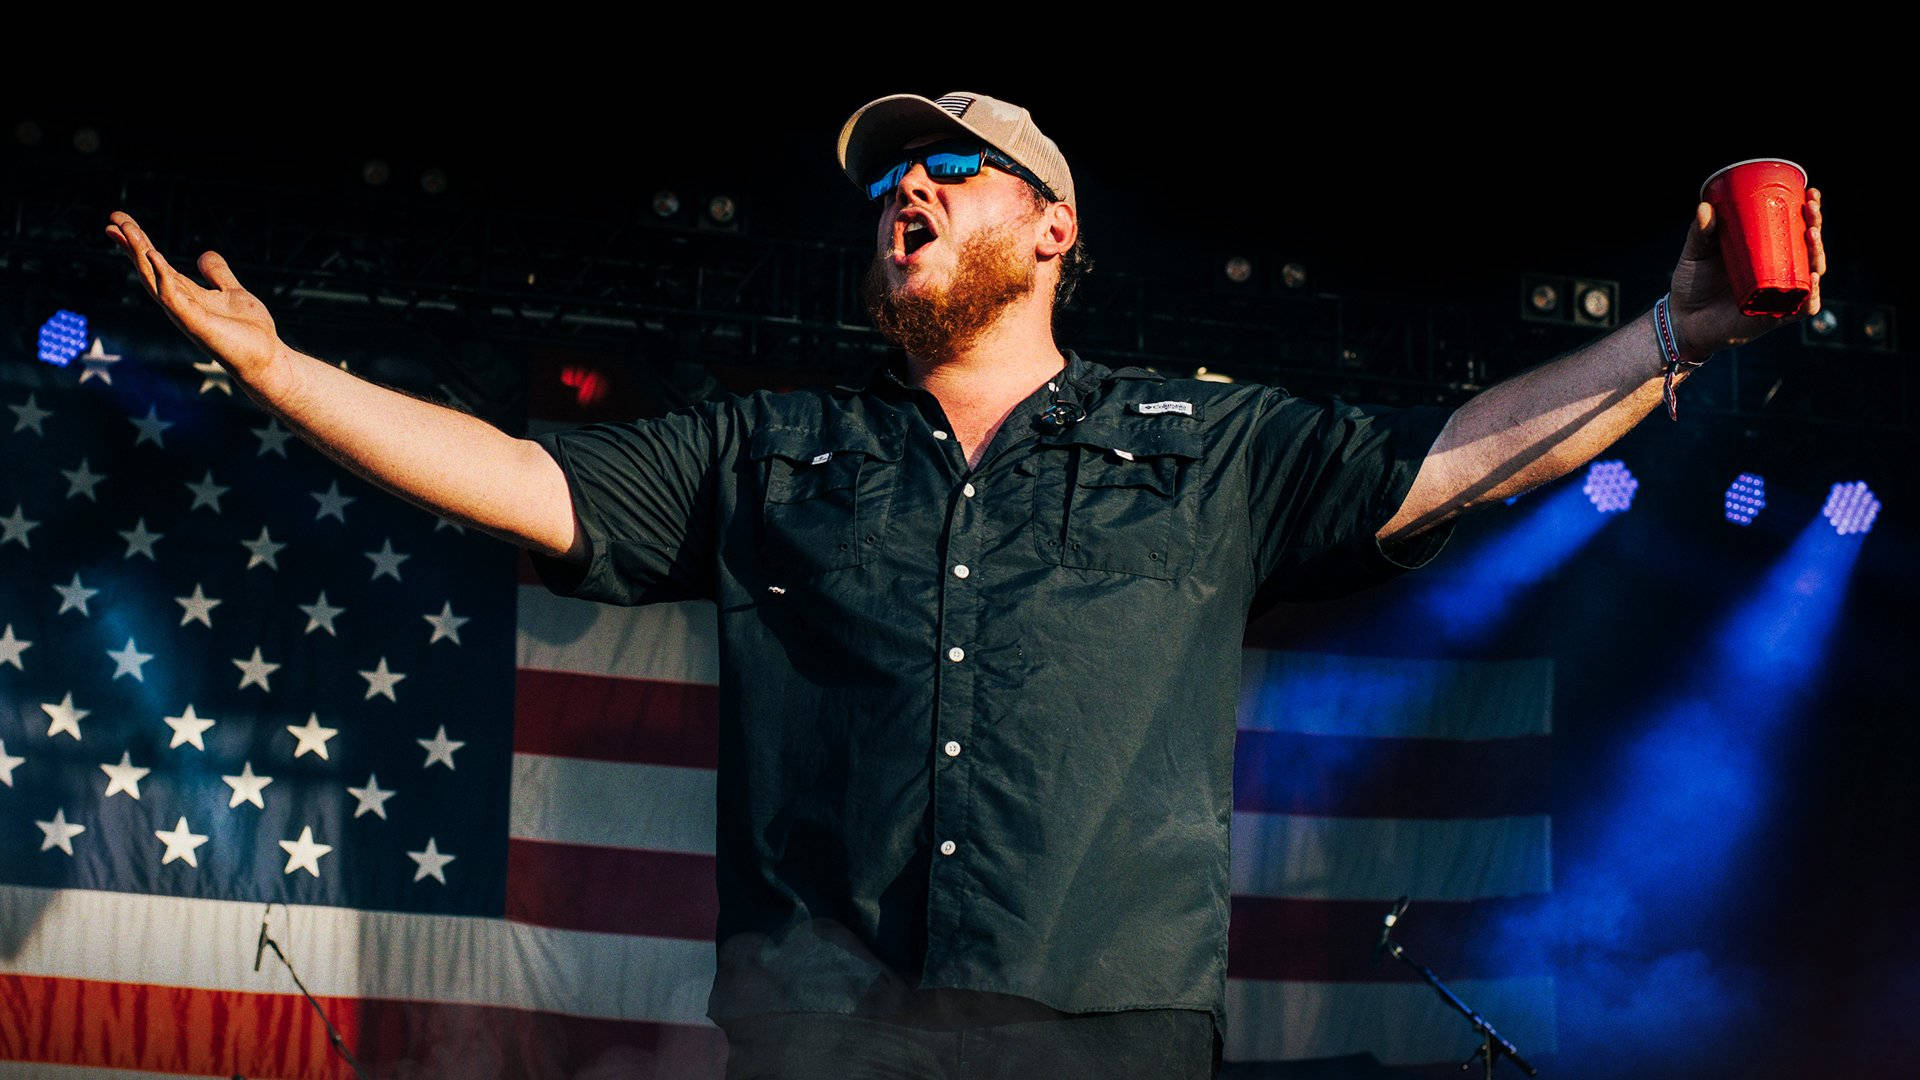 "Country music singer-songwriter Luke Combs performing on stage" Wallpaper